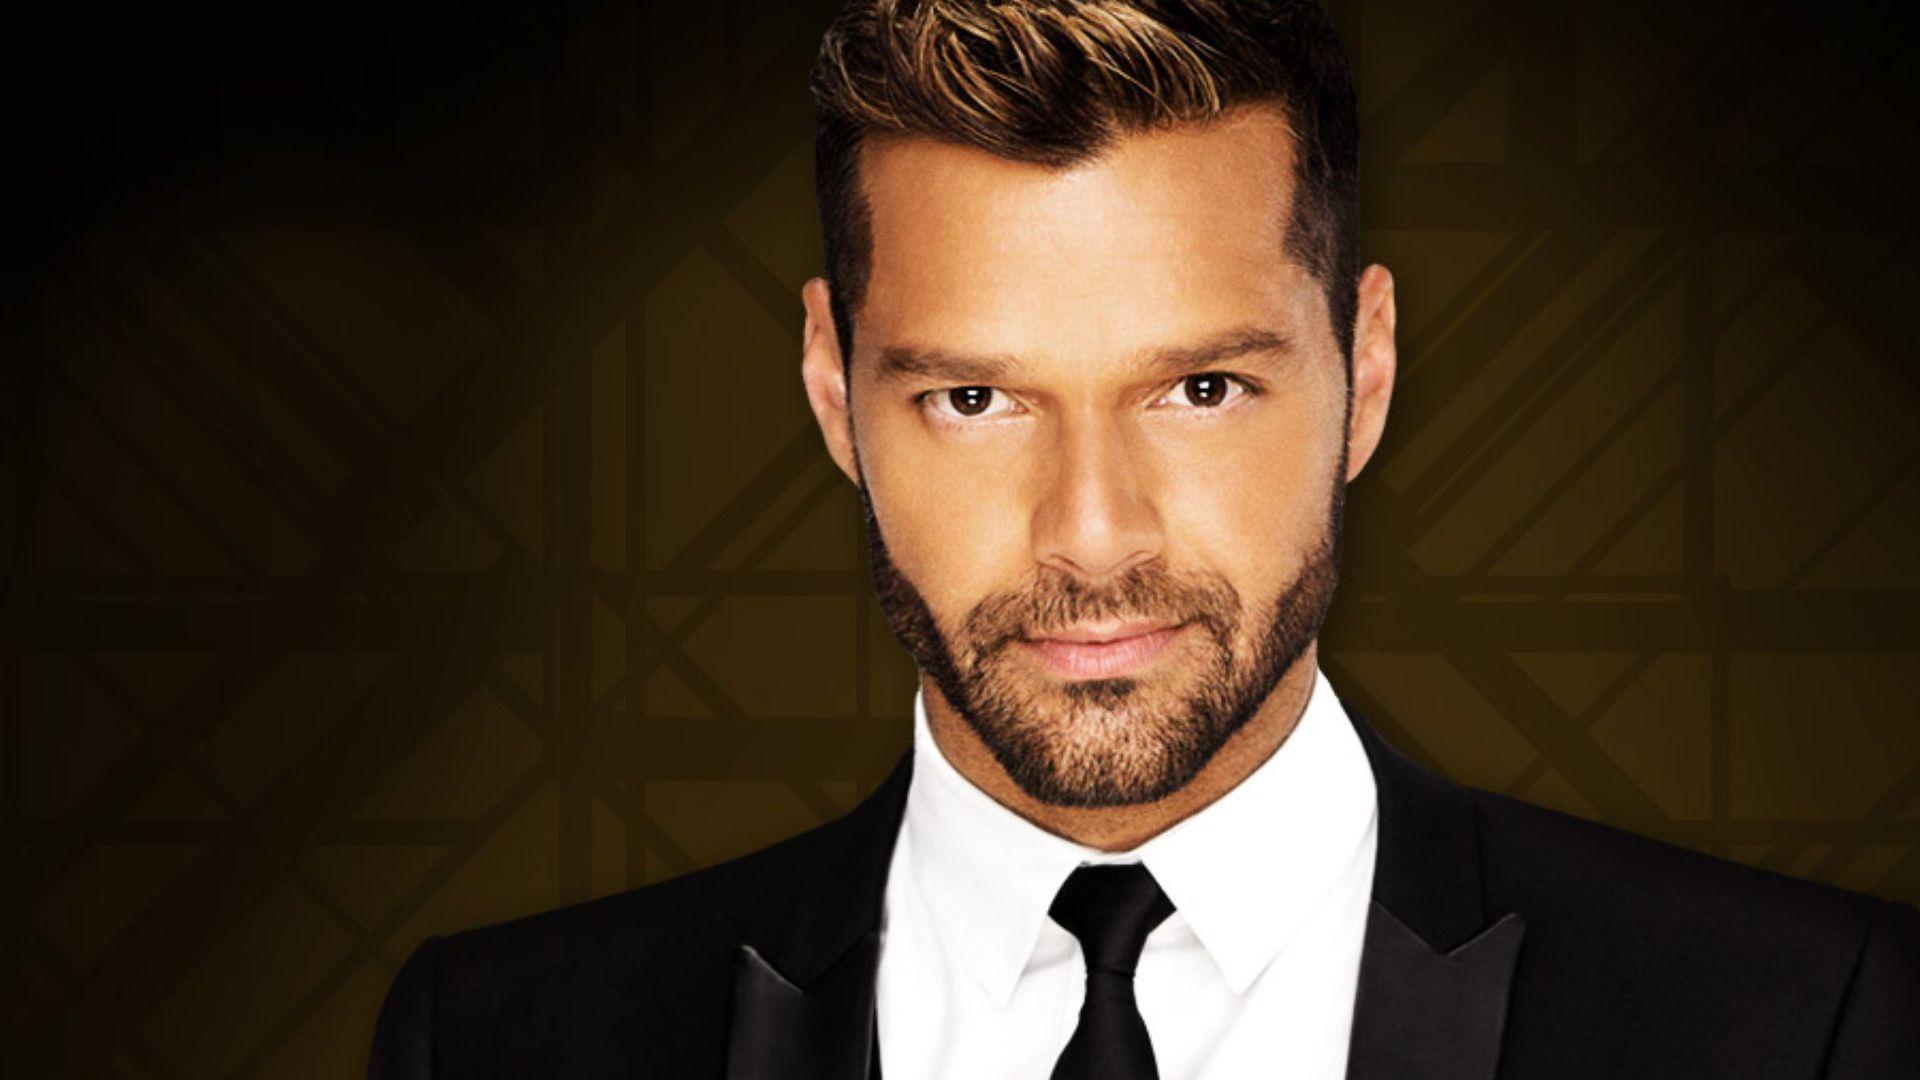 Ricky Martin Wallpapers - Wallpaper Cave.